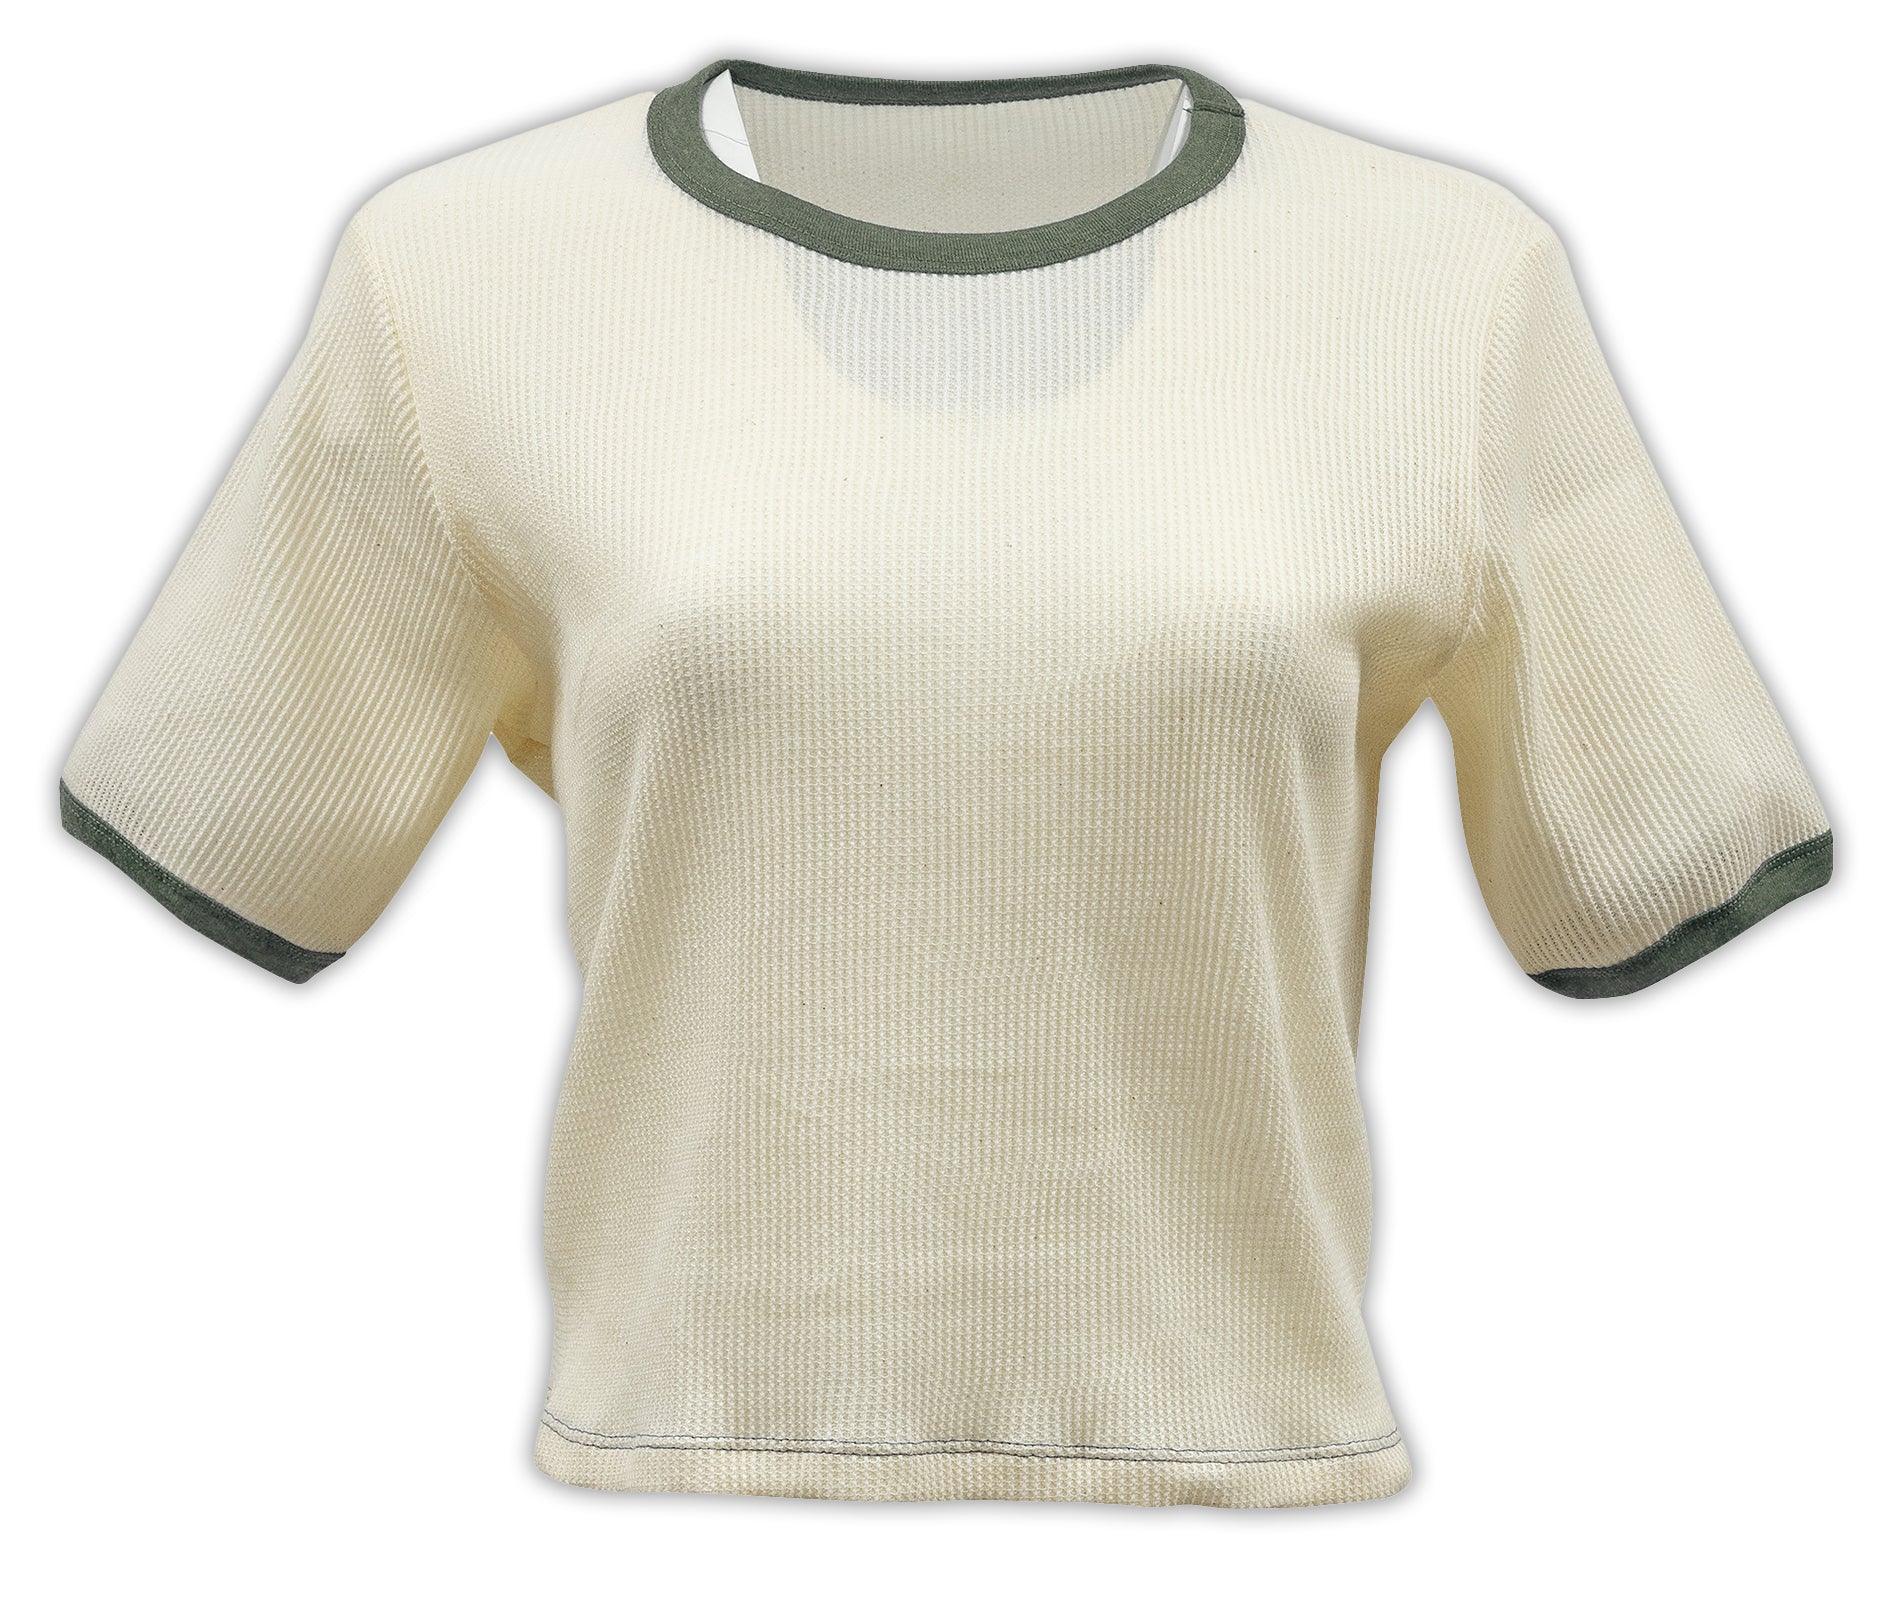 Ladies Courtney Thermal Crop #782531 - Good Land Supply Co.